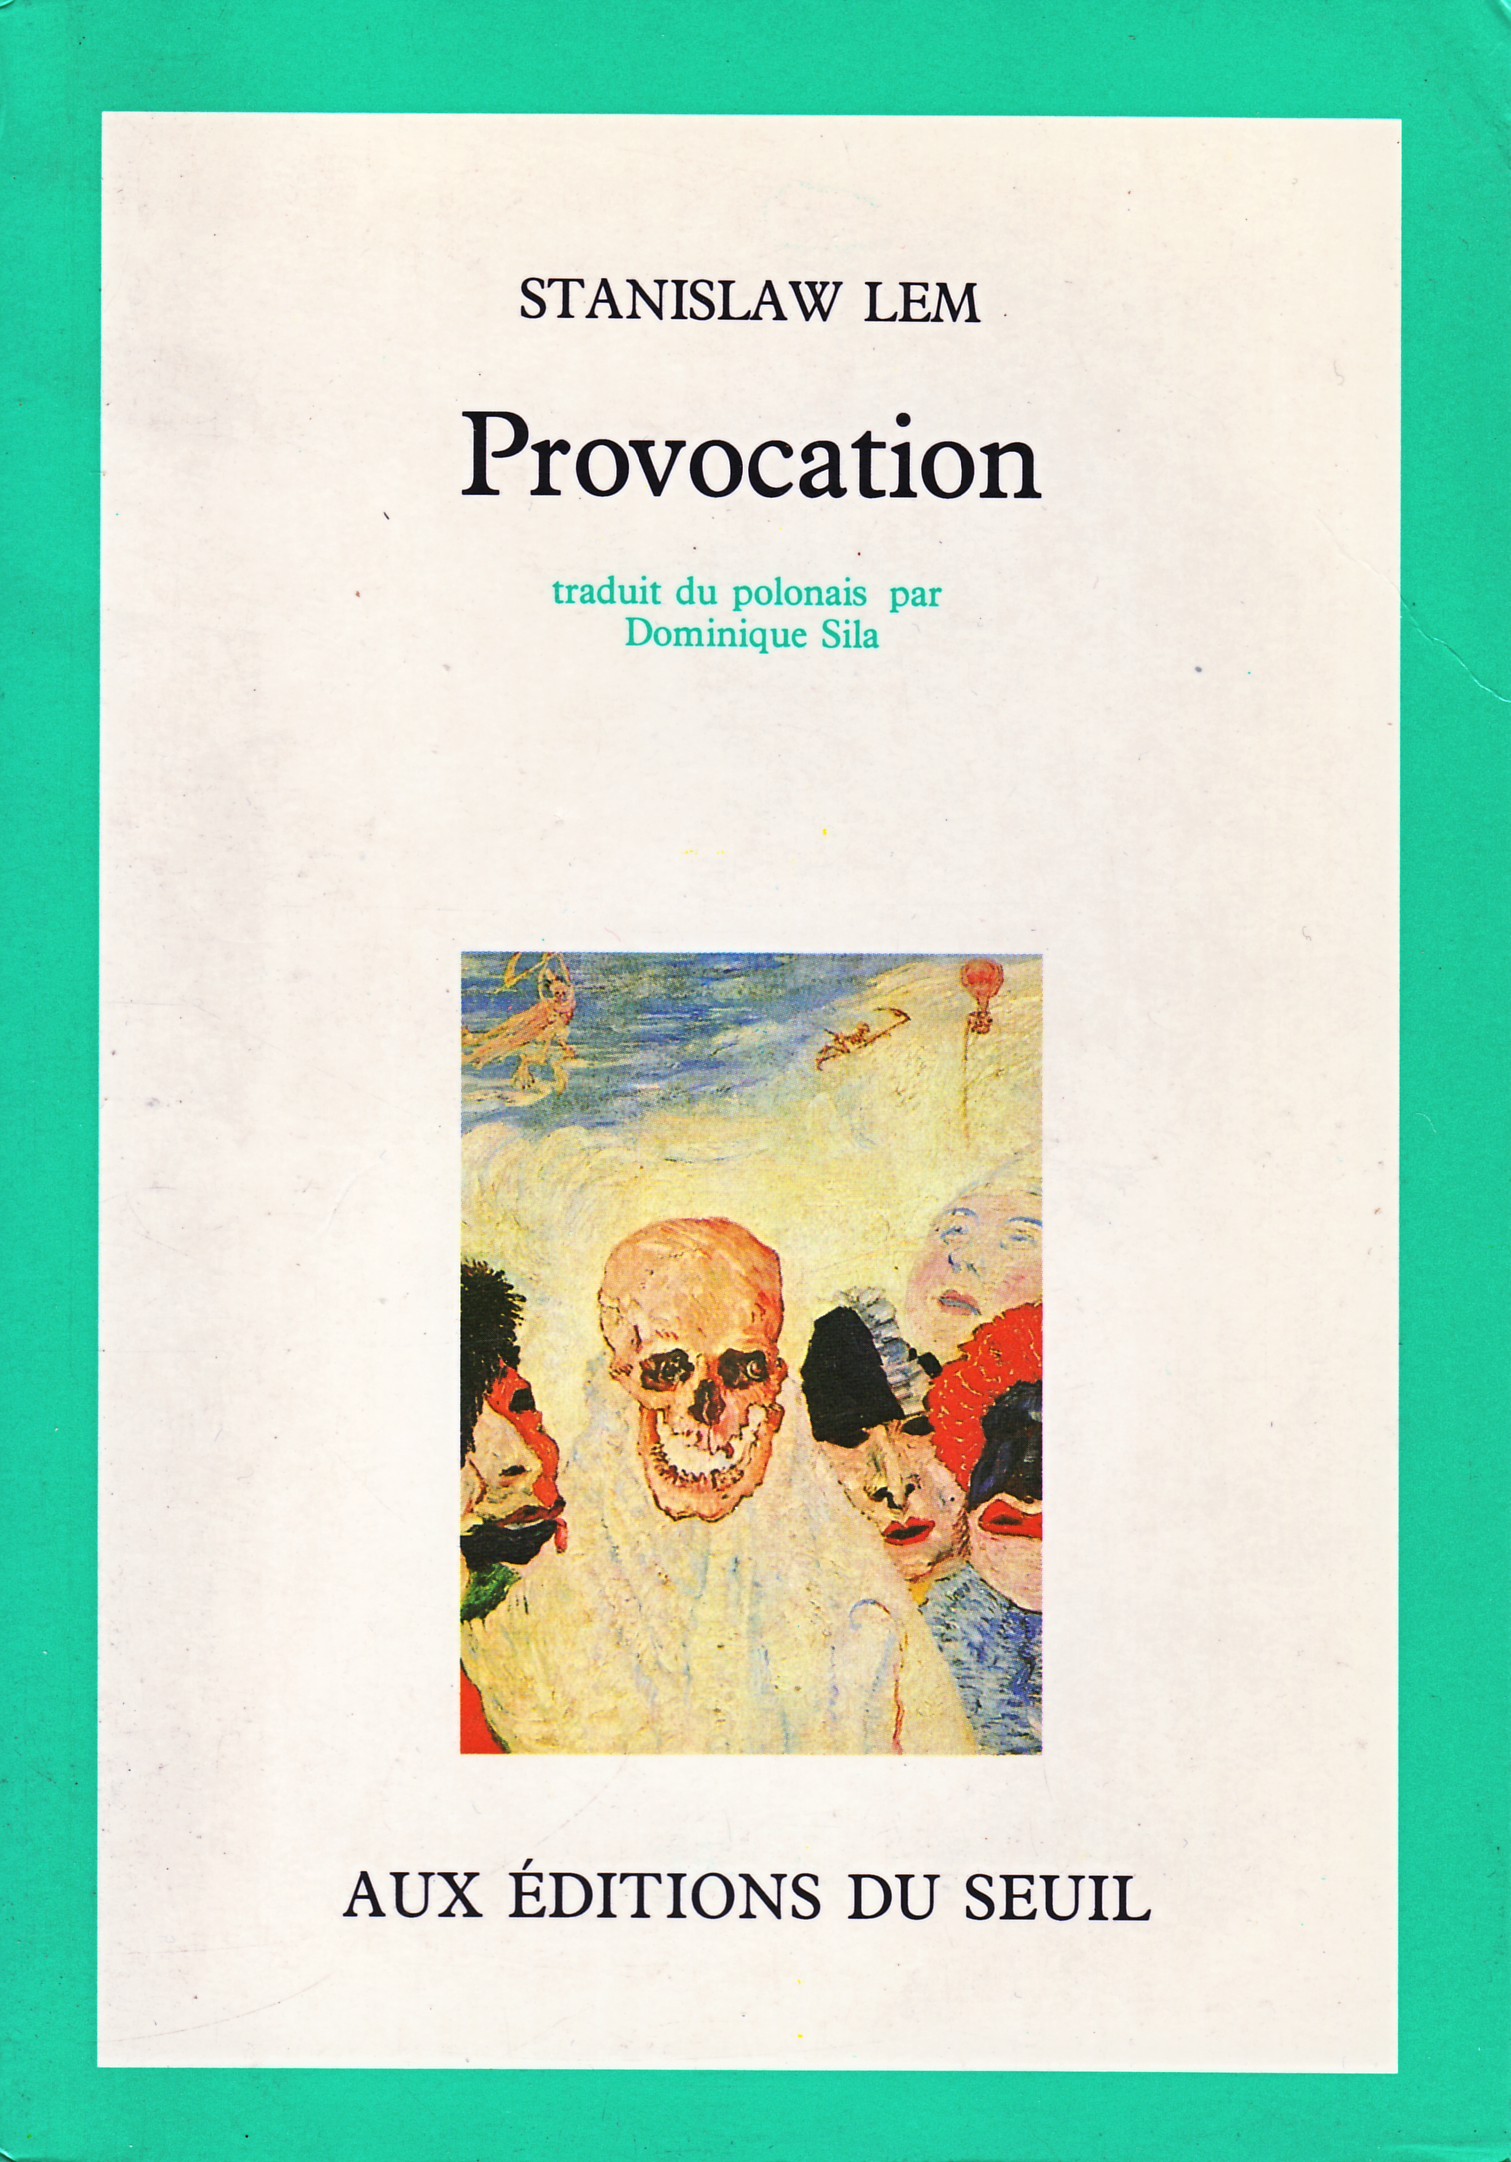 Provocation French Éditions du Seuil 1989.jpg